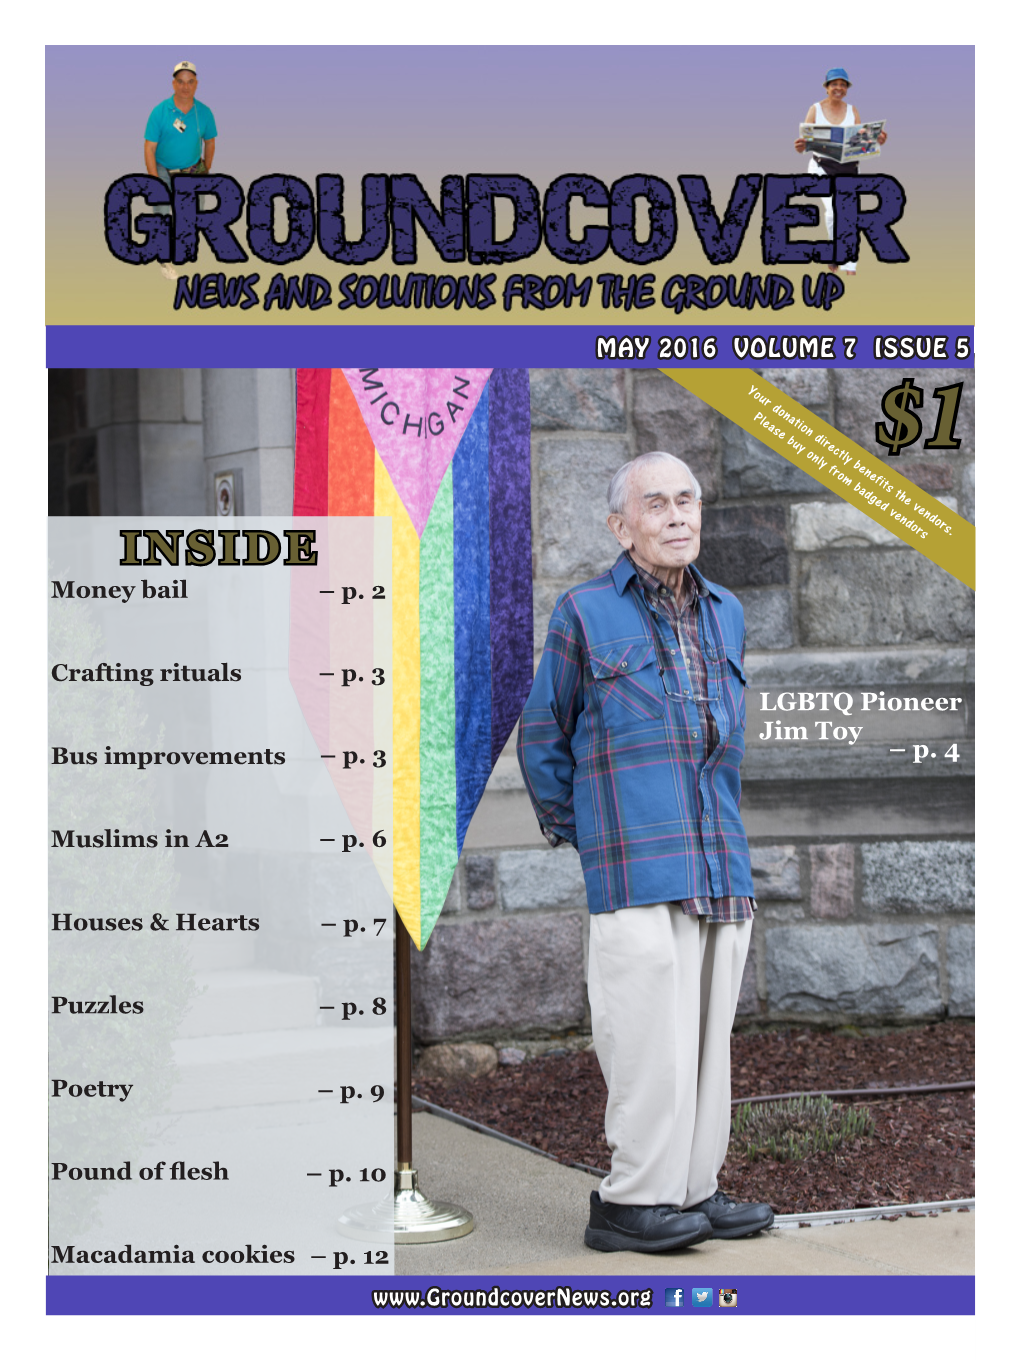 May 2016 Volume 7 Issue 5